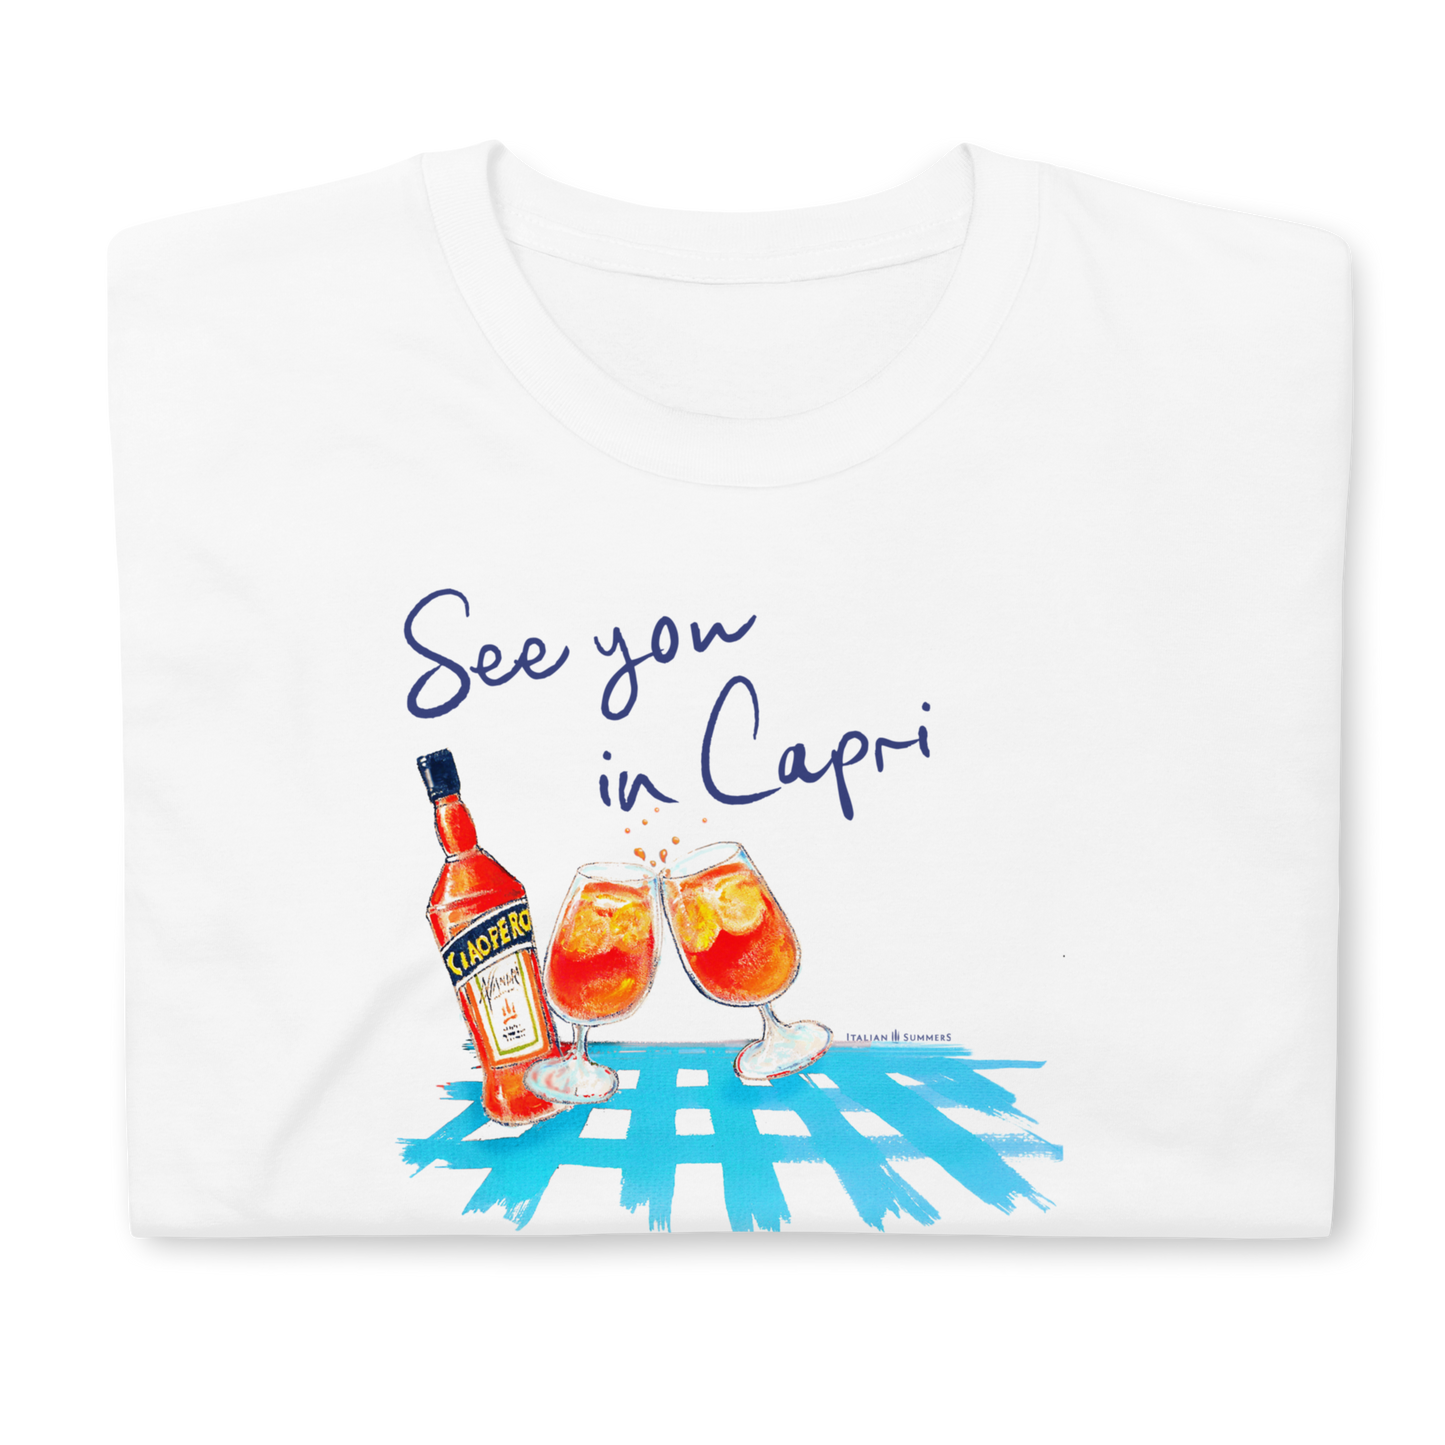 See you in CAPRI Italy inspired t-shirt by Italian Summers